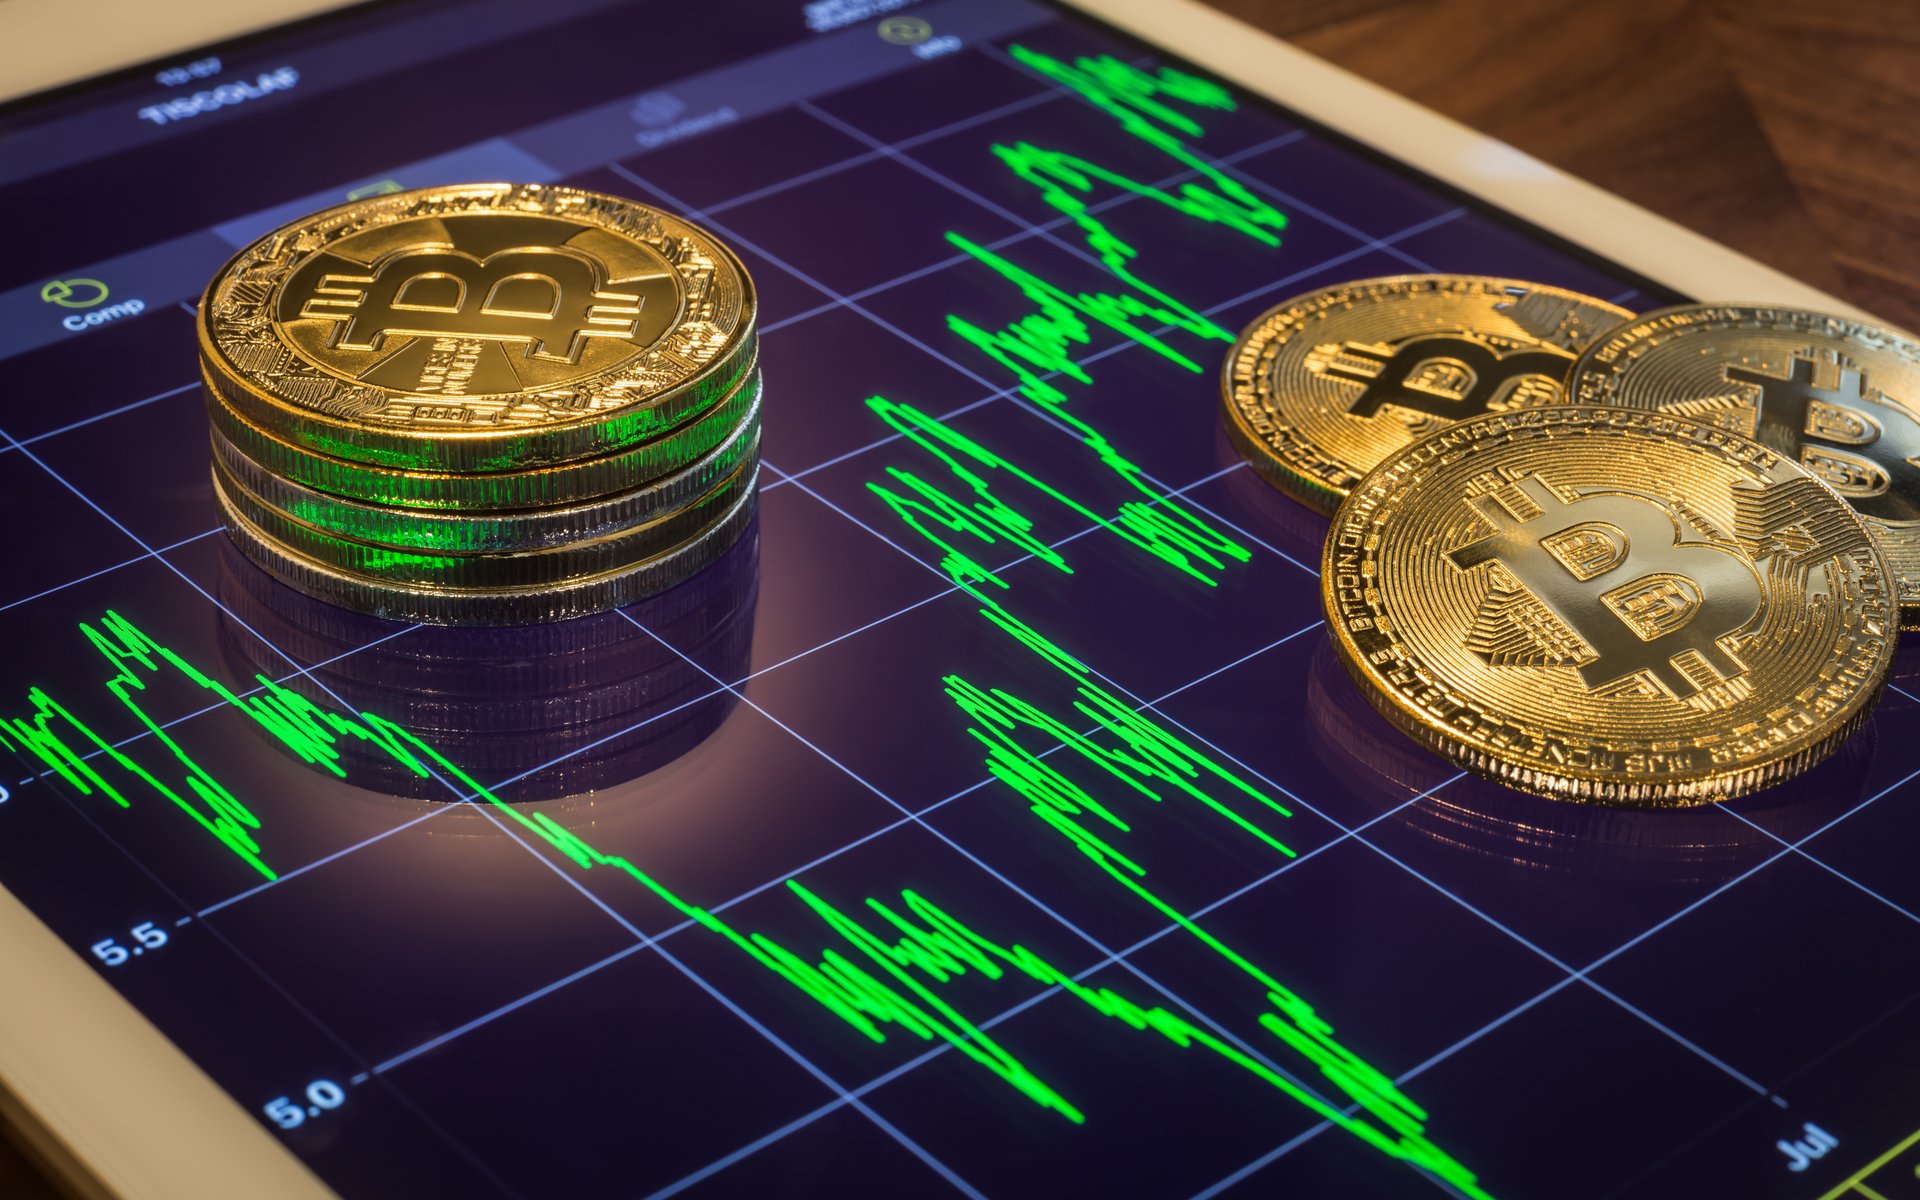 Bitcoin Price Surge Due to Increased Trading Volume in Asia, Says Experts